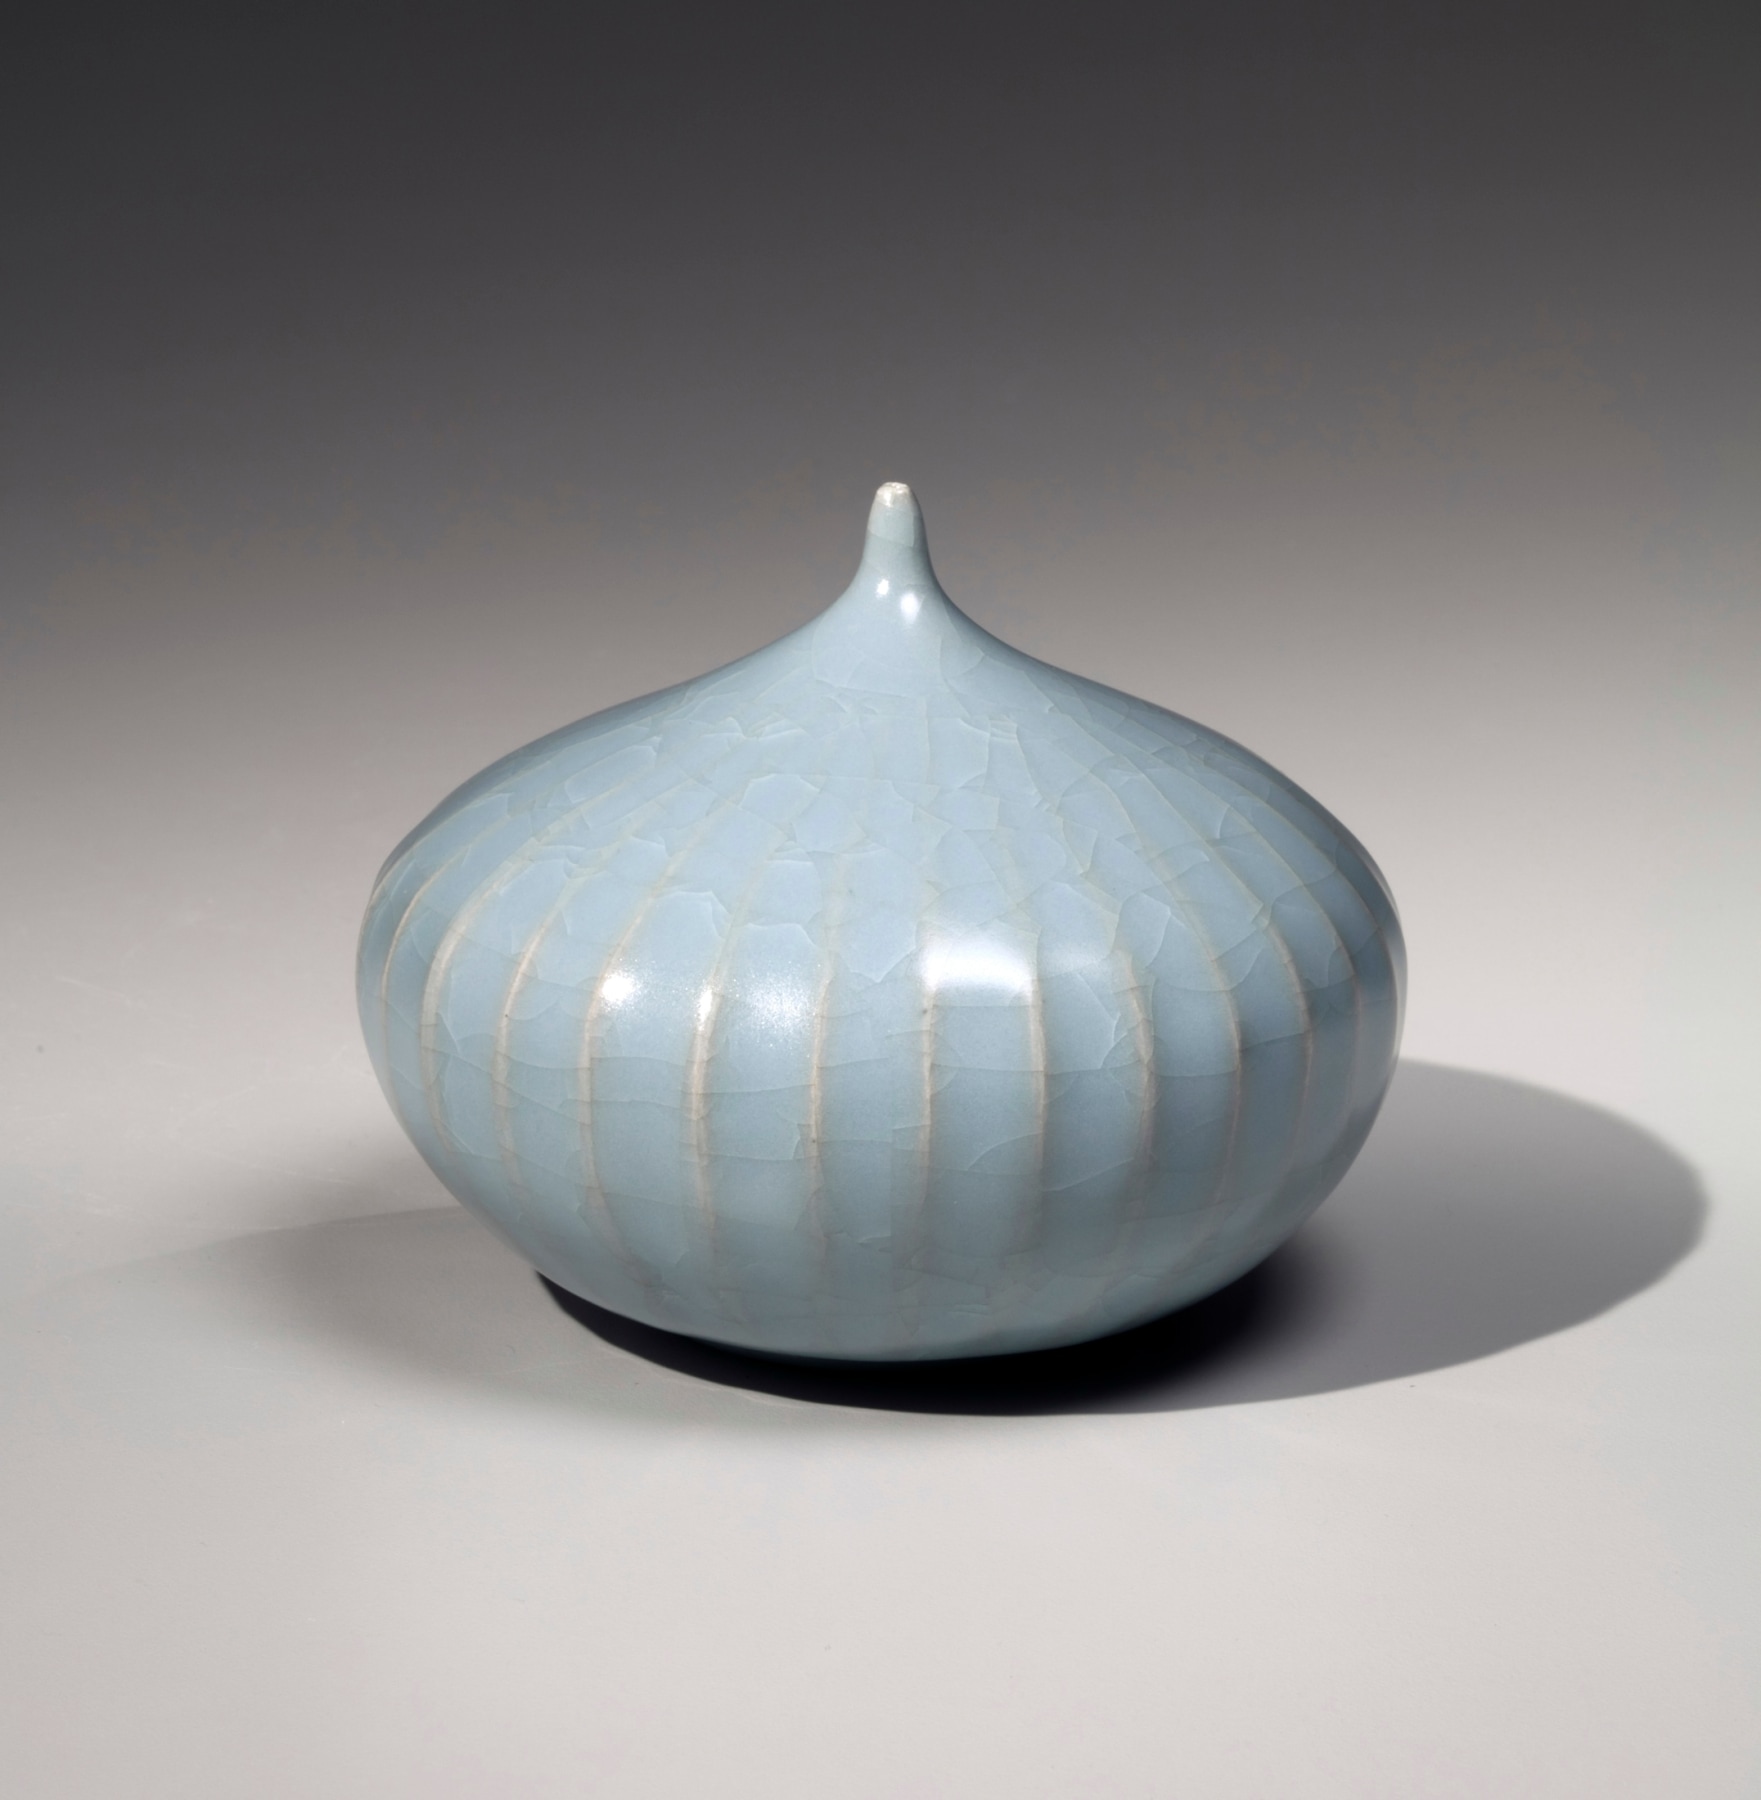 Onion-shaped, fluted, craquelure celadon-glazed incense burner in two parts, 2019